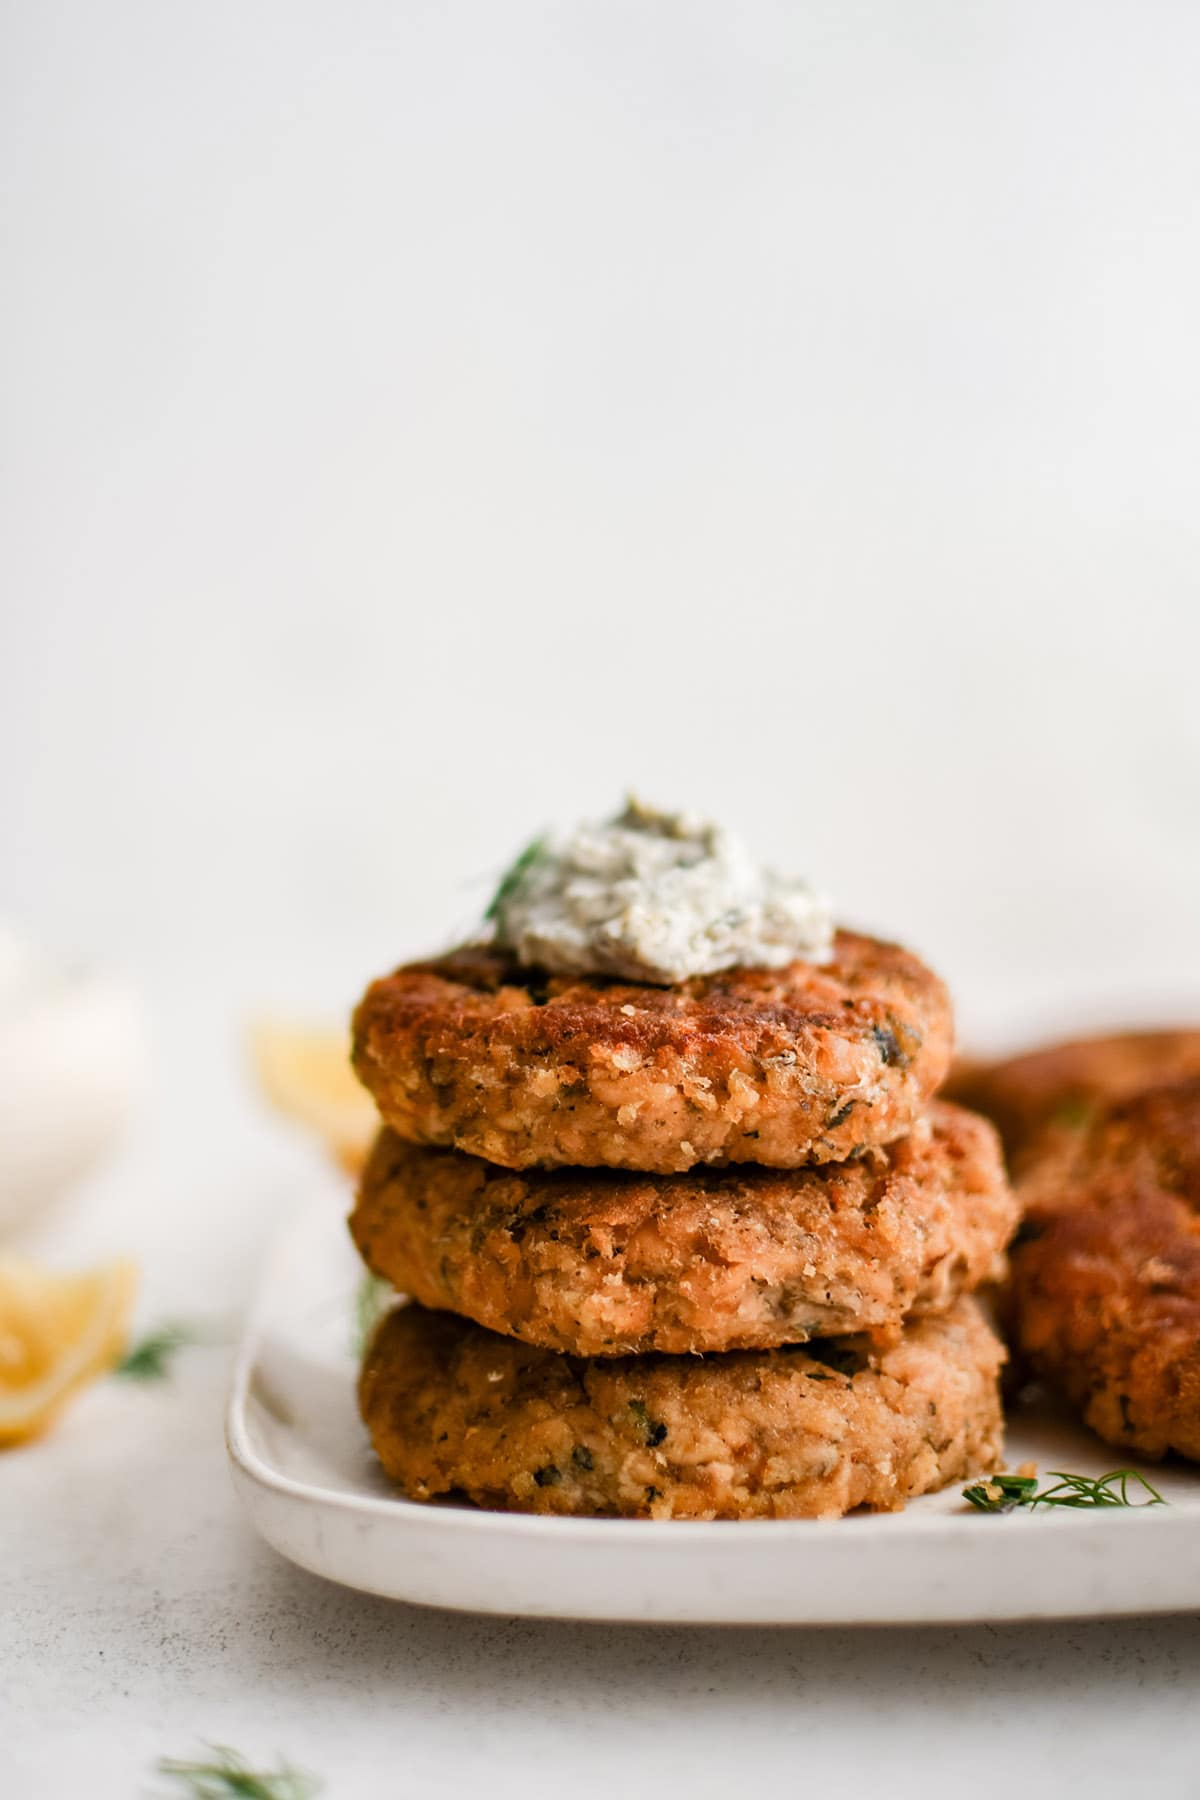 image of stacked salmon patties with dill dip on top of them